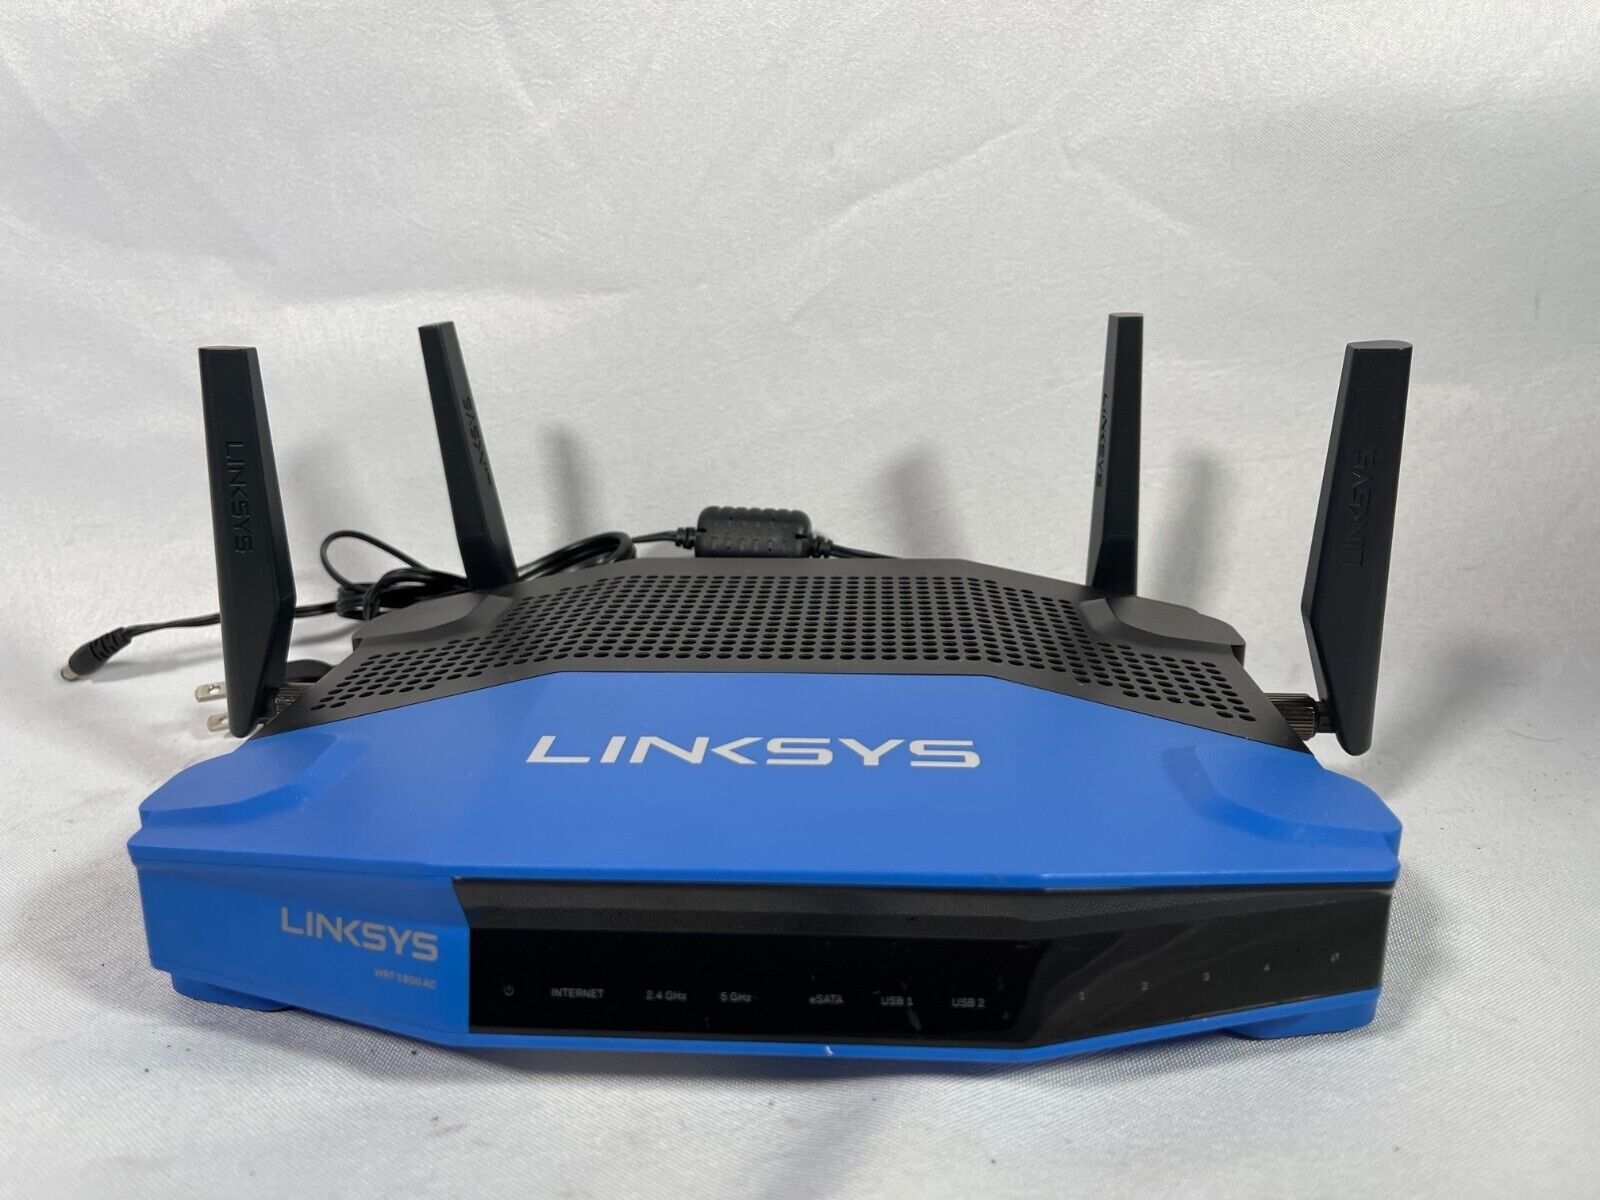 Linksys WRT1900AC AC1900 Dual Band WiFi Router With Antennas And Power Cord